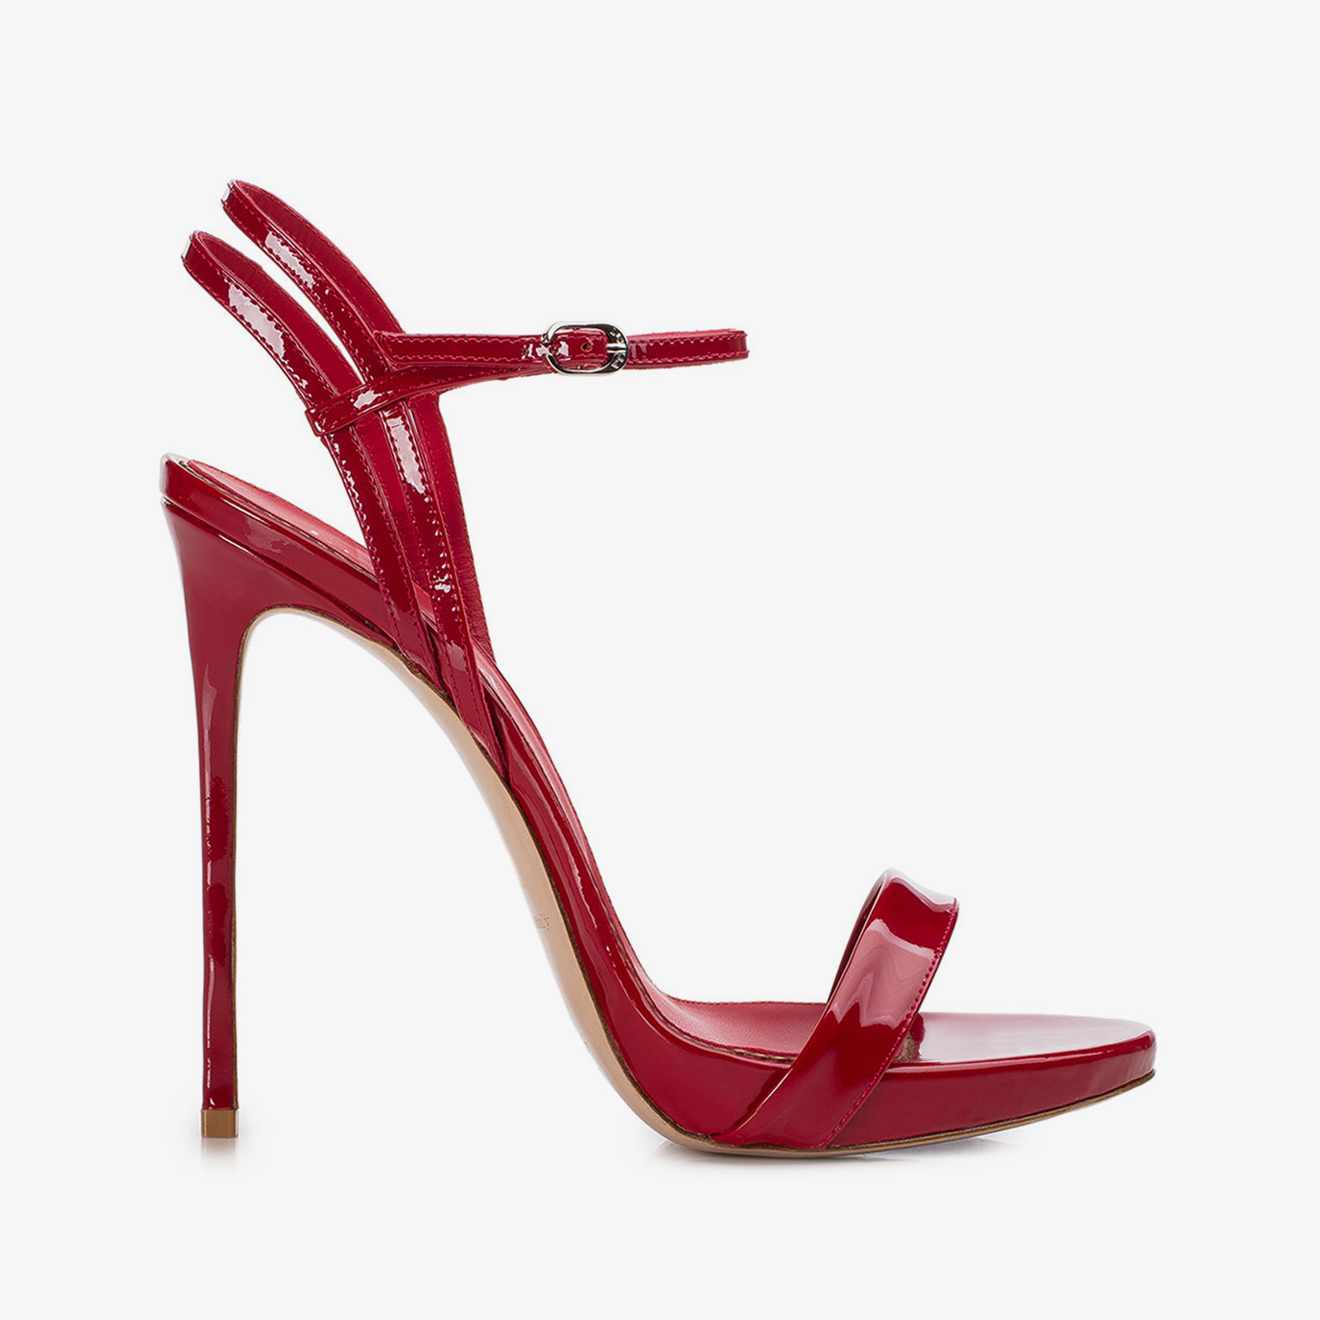 Red patent leather sandal - Le Silla